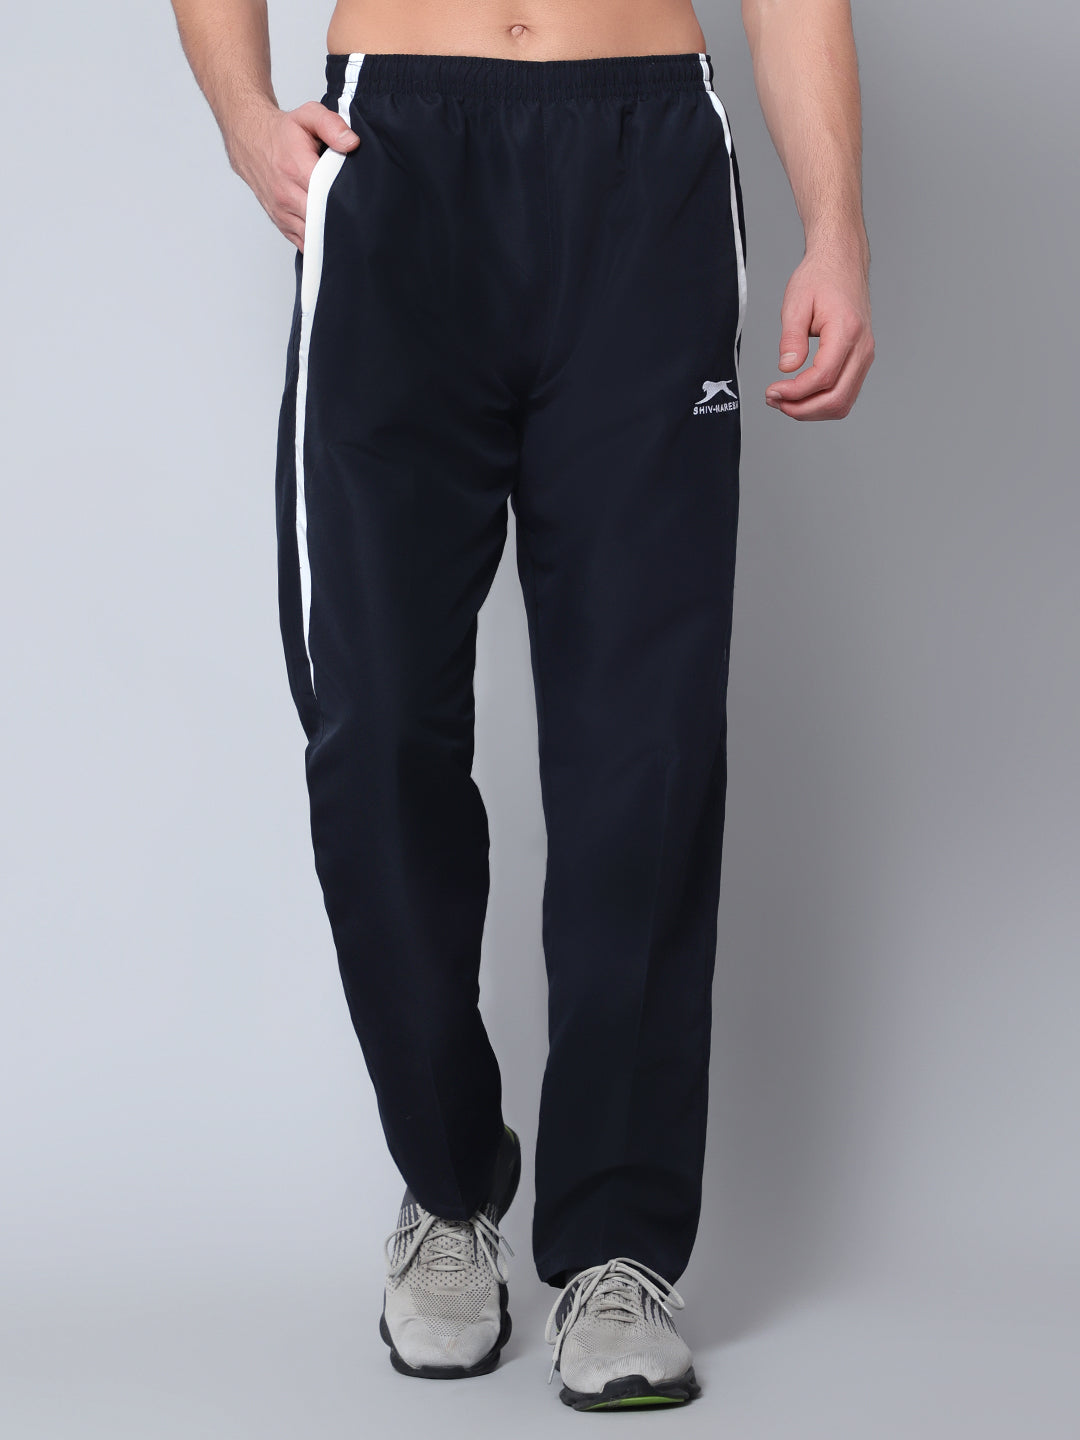 Weiv Gear Men's Track Pants – Casual Drawstring India | Ubuy